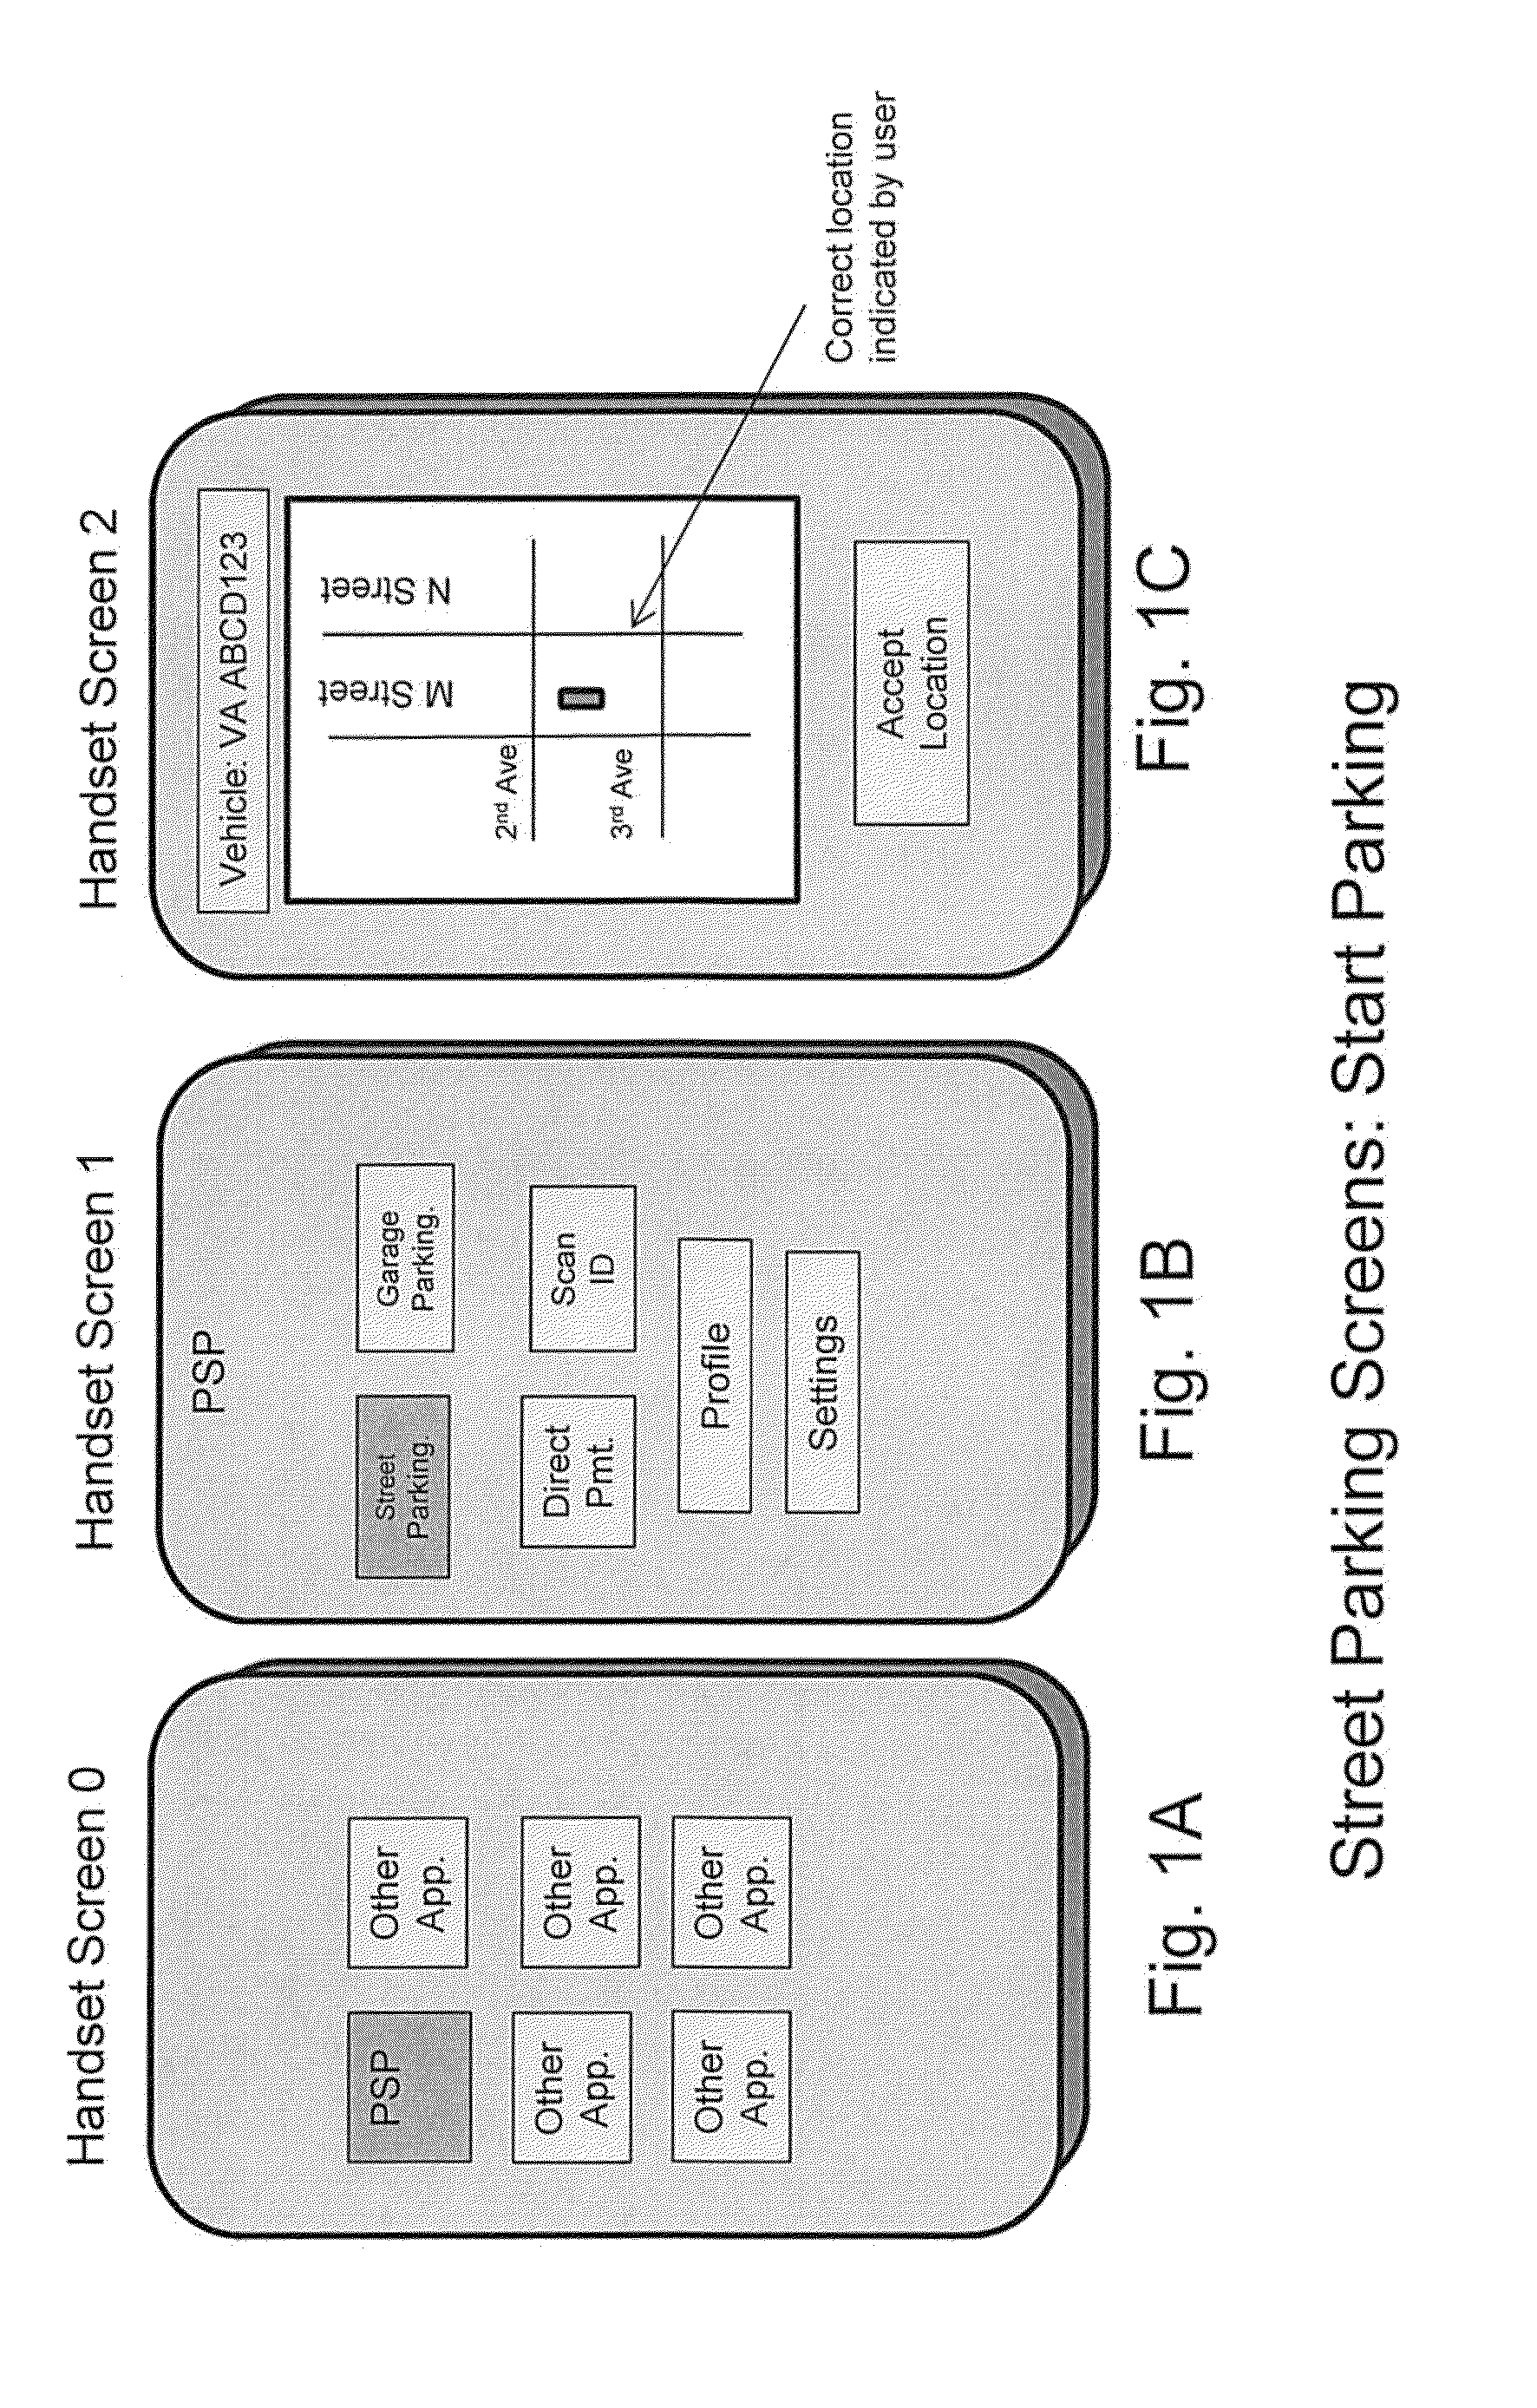 Methods and systems for electronic payment for on-street parking